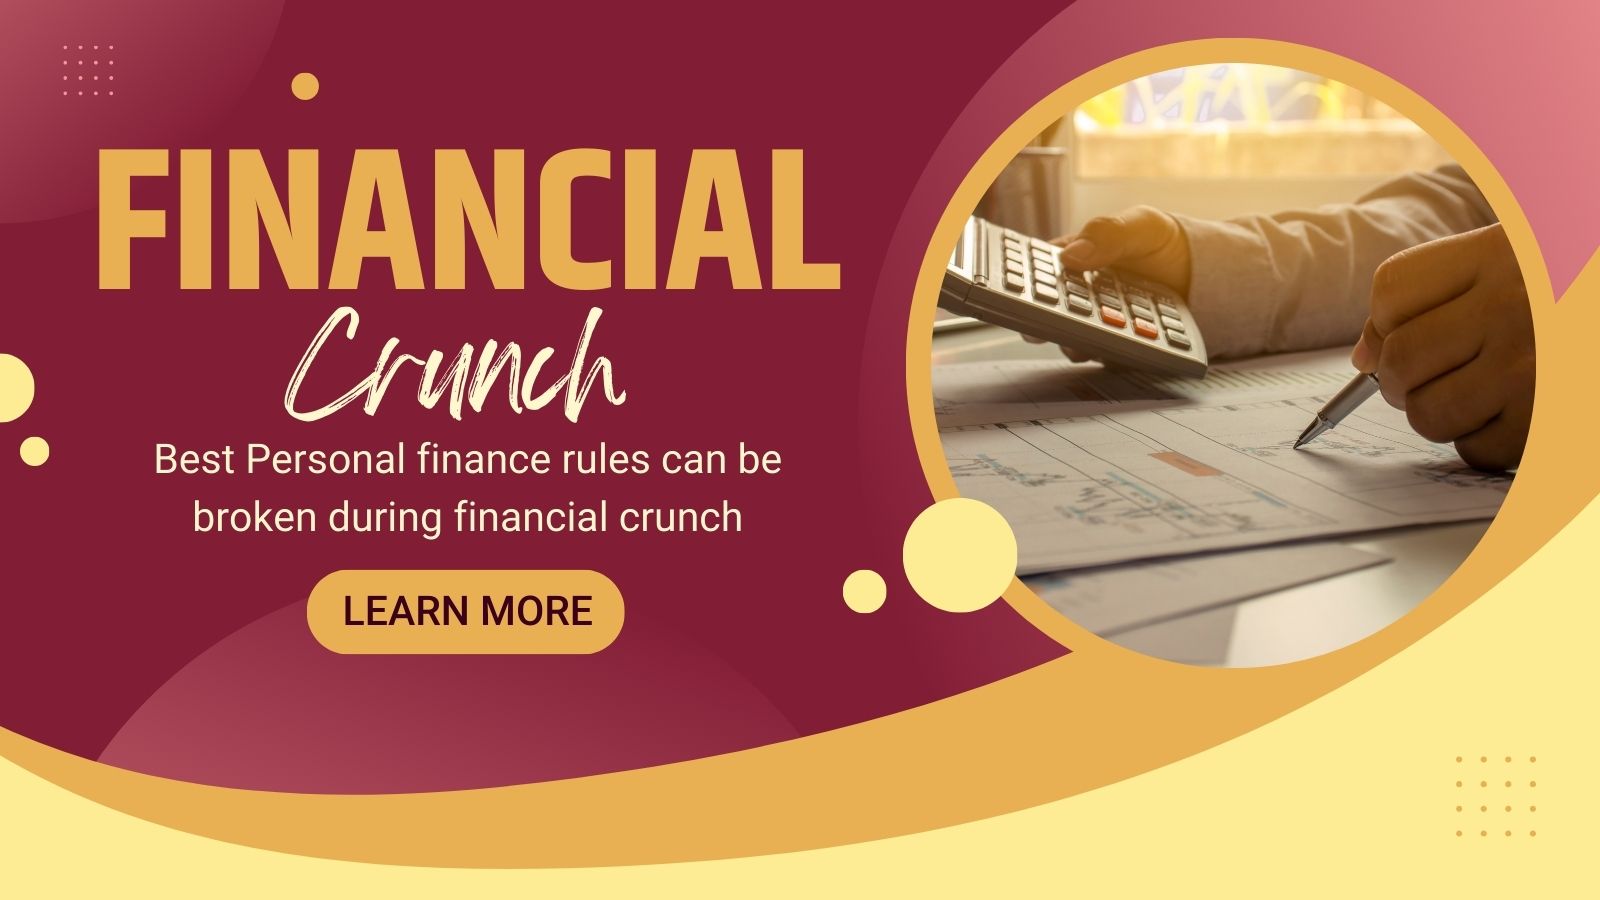 Best Personal finance rules can be broken during financial crunch